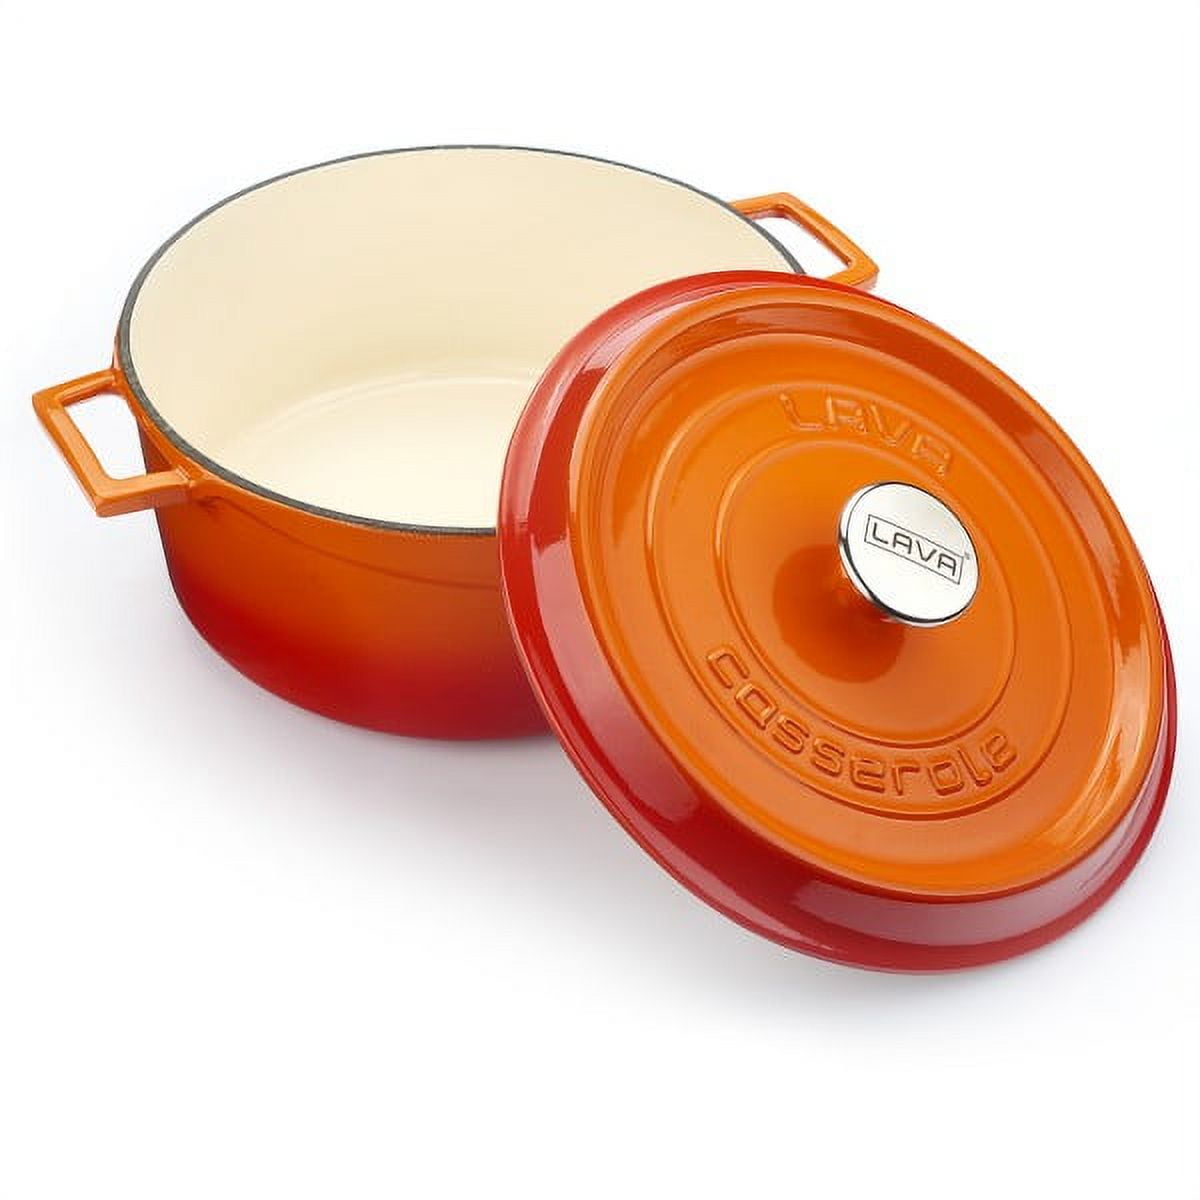 LAVA 5 Quarts Cast Iron Dutch Oven: Multipurpose Stylish Oval Shape Dutch  Oven Pot with Glossy Sand-Colored Three Layers of Enamel Coated Interior  with Trendy Lid (Orange) 